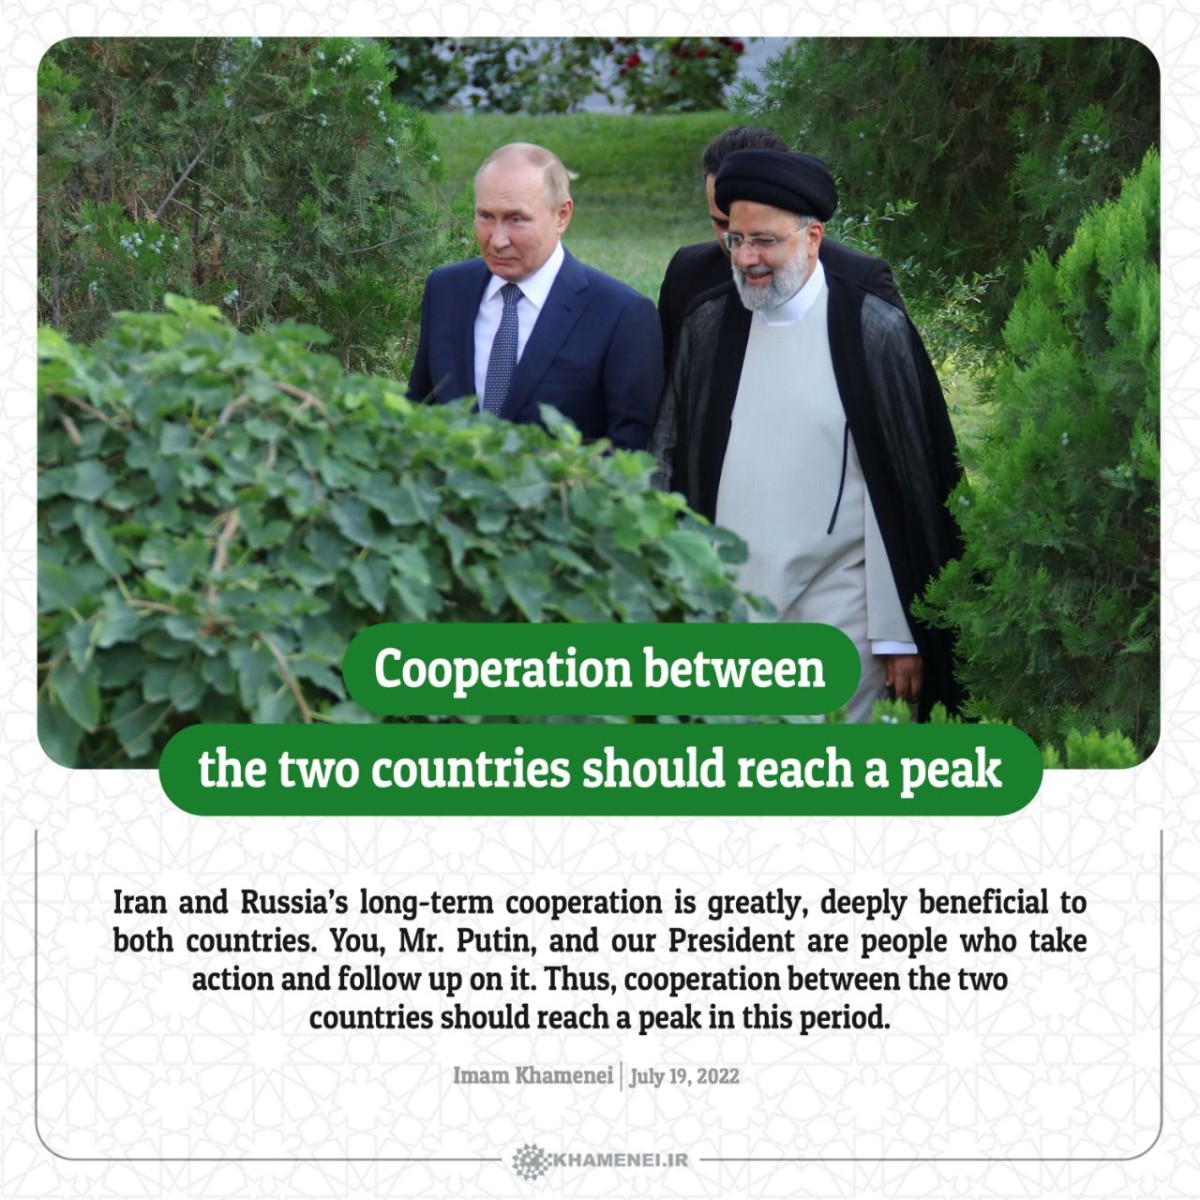 Cooperation between the two countries should reach a peak